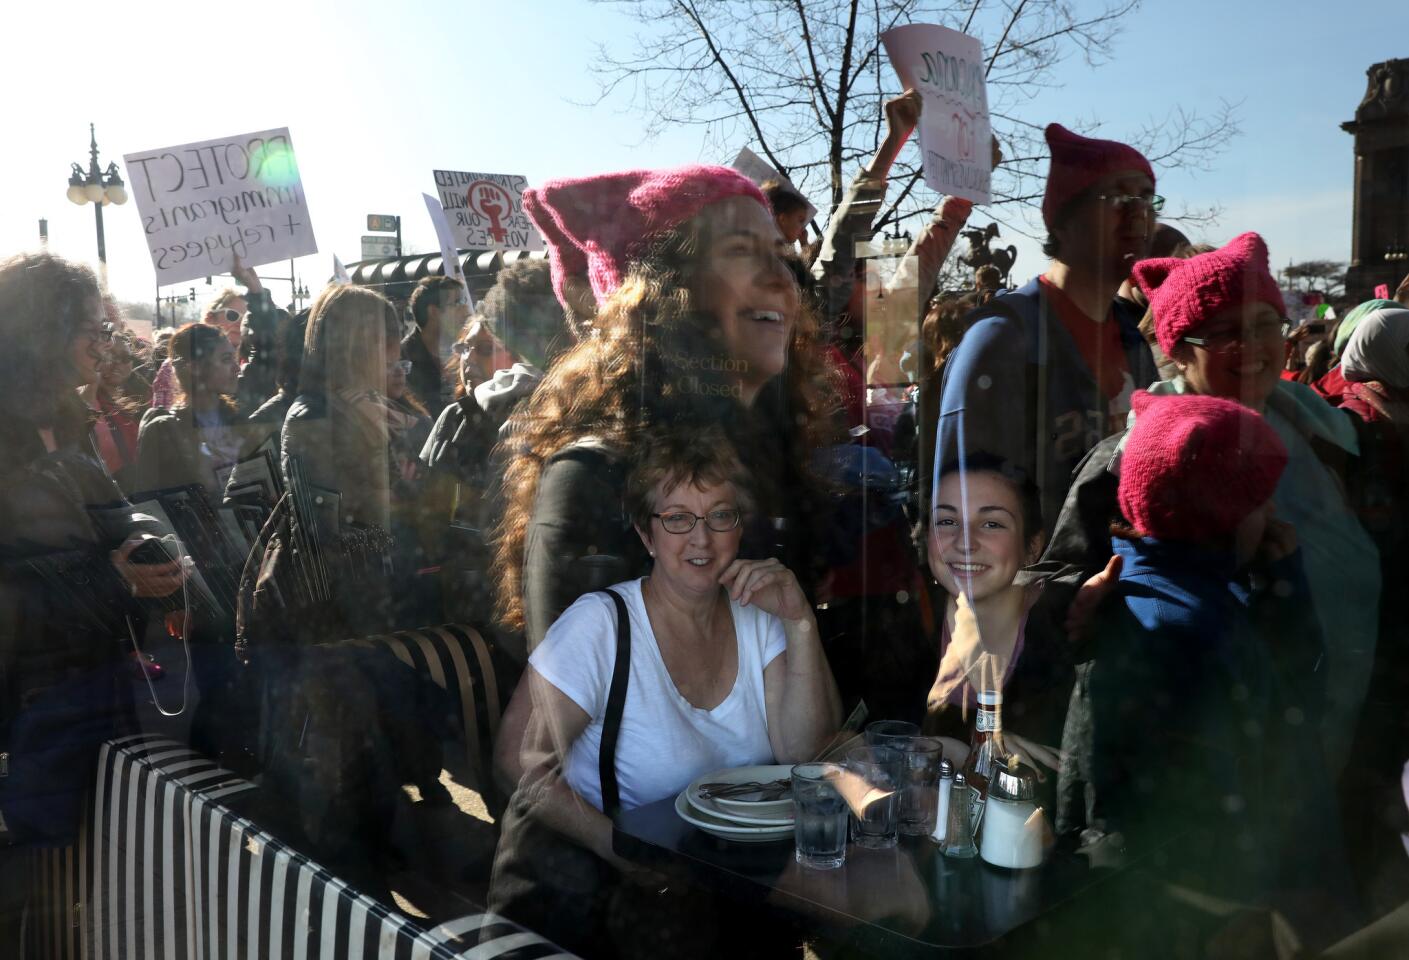 Diners in a cafe along Michigan Avenue look out at a sea of marchers reflected in the windows during the Women's March in Chicago on Jan. 21, 2017.